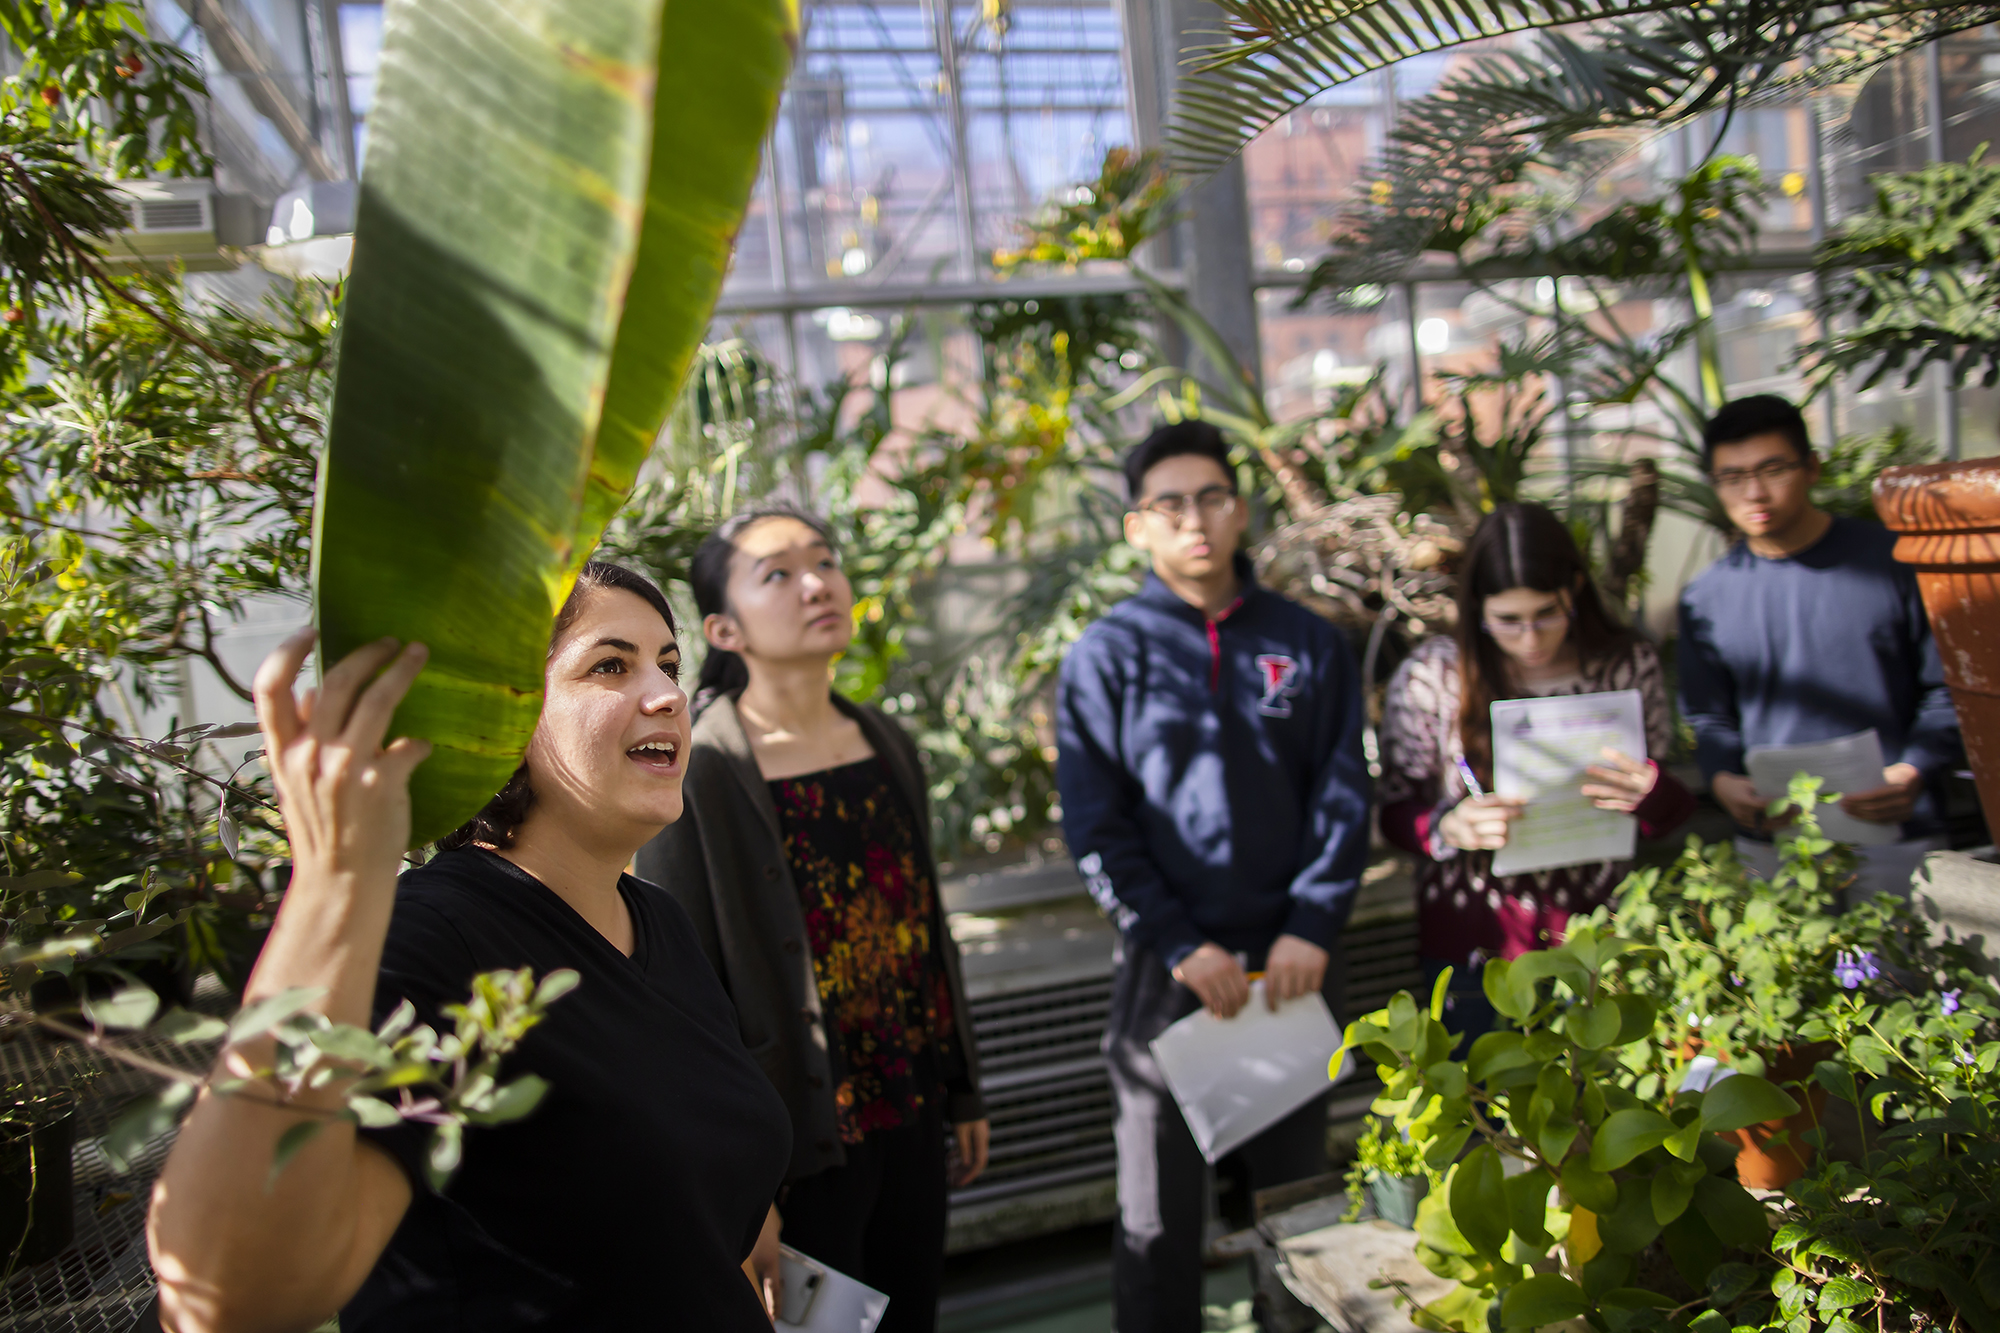 Holding a broad tropical leaf, a person speaks to students holding papers in a greenhouse.